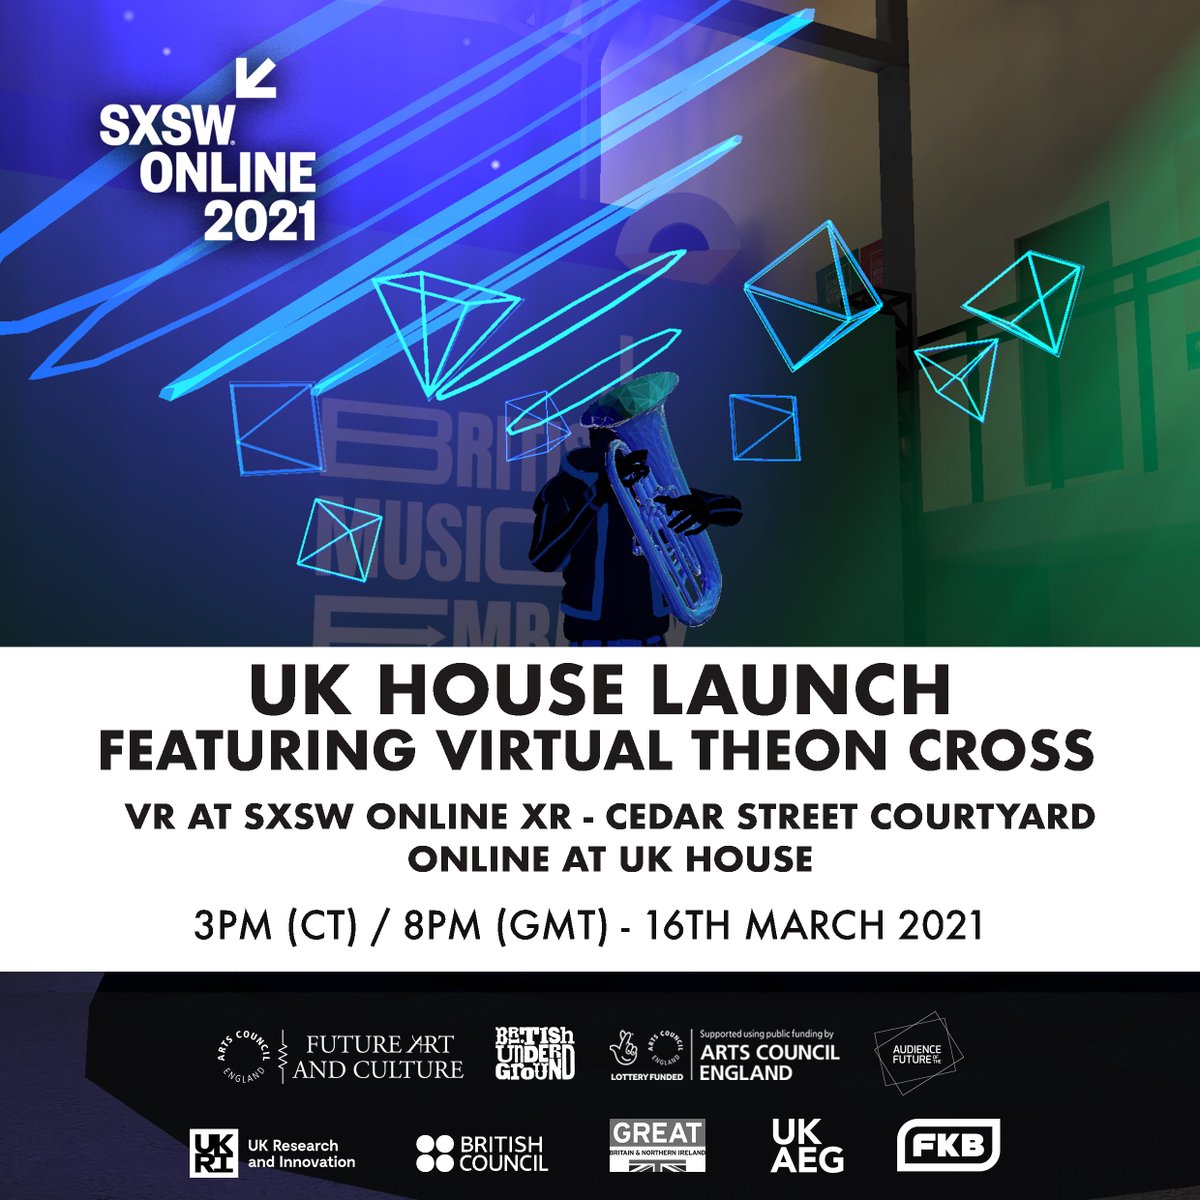 Join us tonight from 8pm for our UK House launch event featuring a virtual avatar of  @TheonCross
 filmed at  @AbbeyRoad for more information head to the theukhouse.com - See you there! 
#UKATSXSW #UKHouse #FutureArtandCulture #SXSWOnline